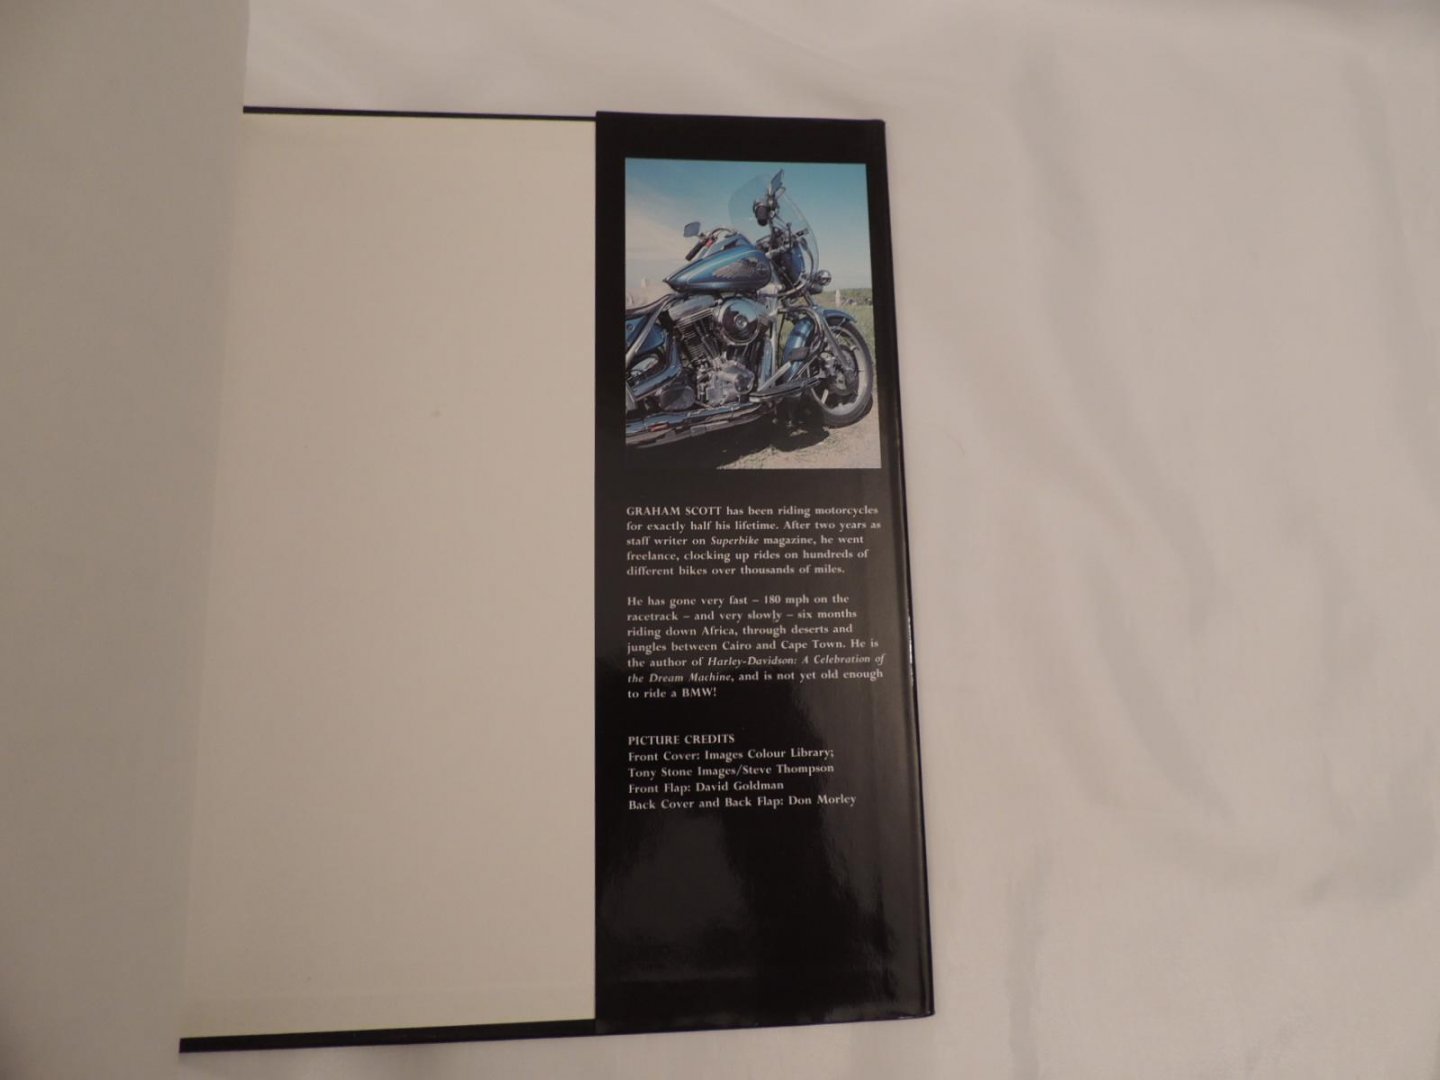 Scott, Graham - Motorcycle Mania. Harley Davidson: The Power, the Glory, the Legend Lives